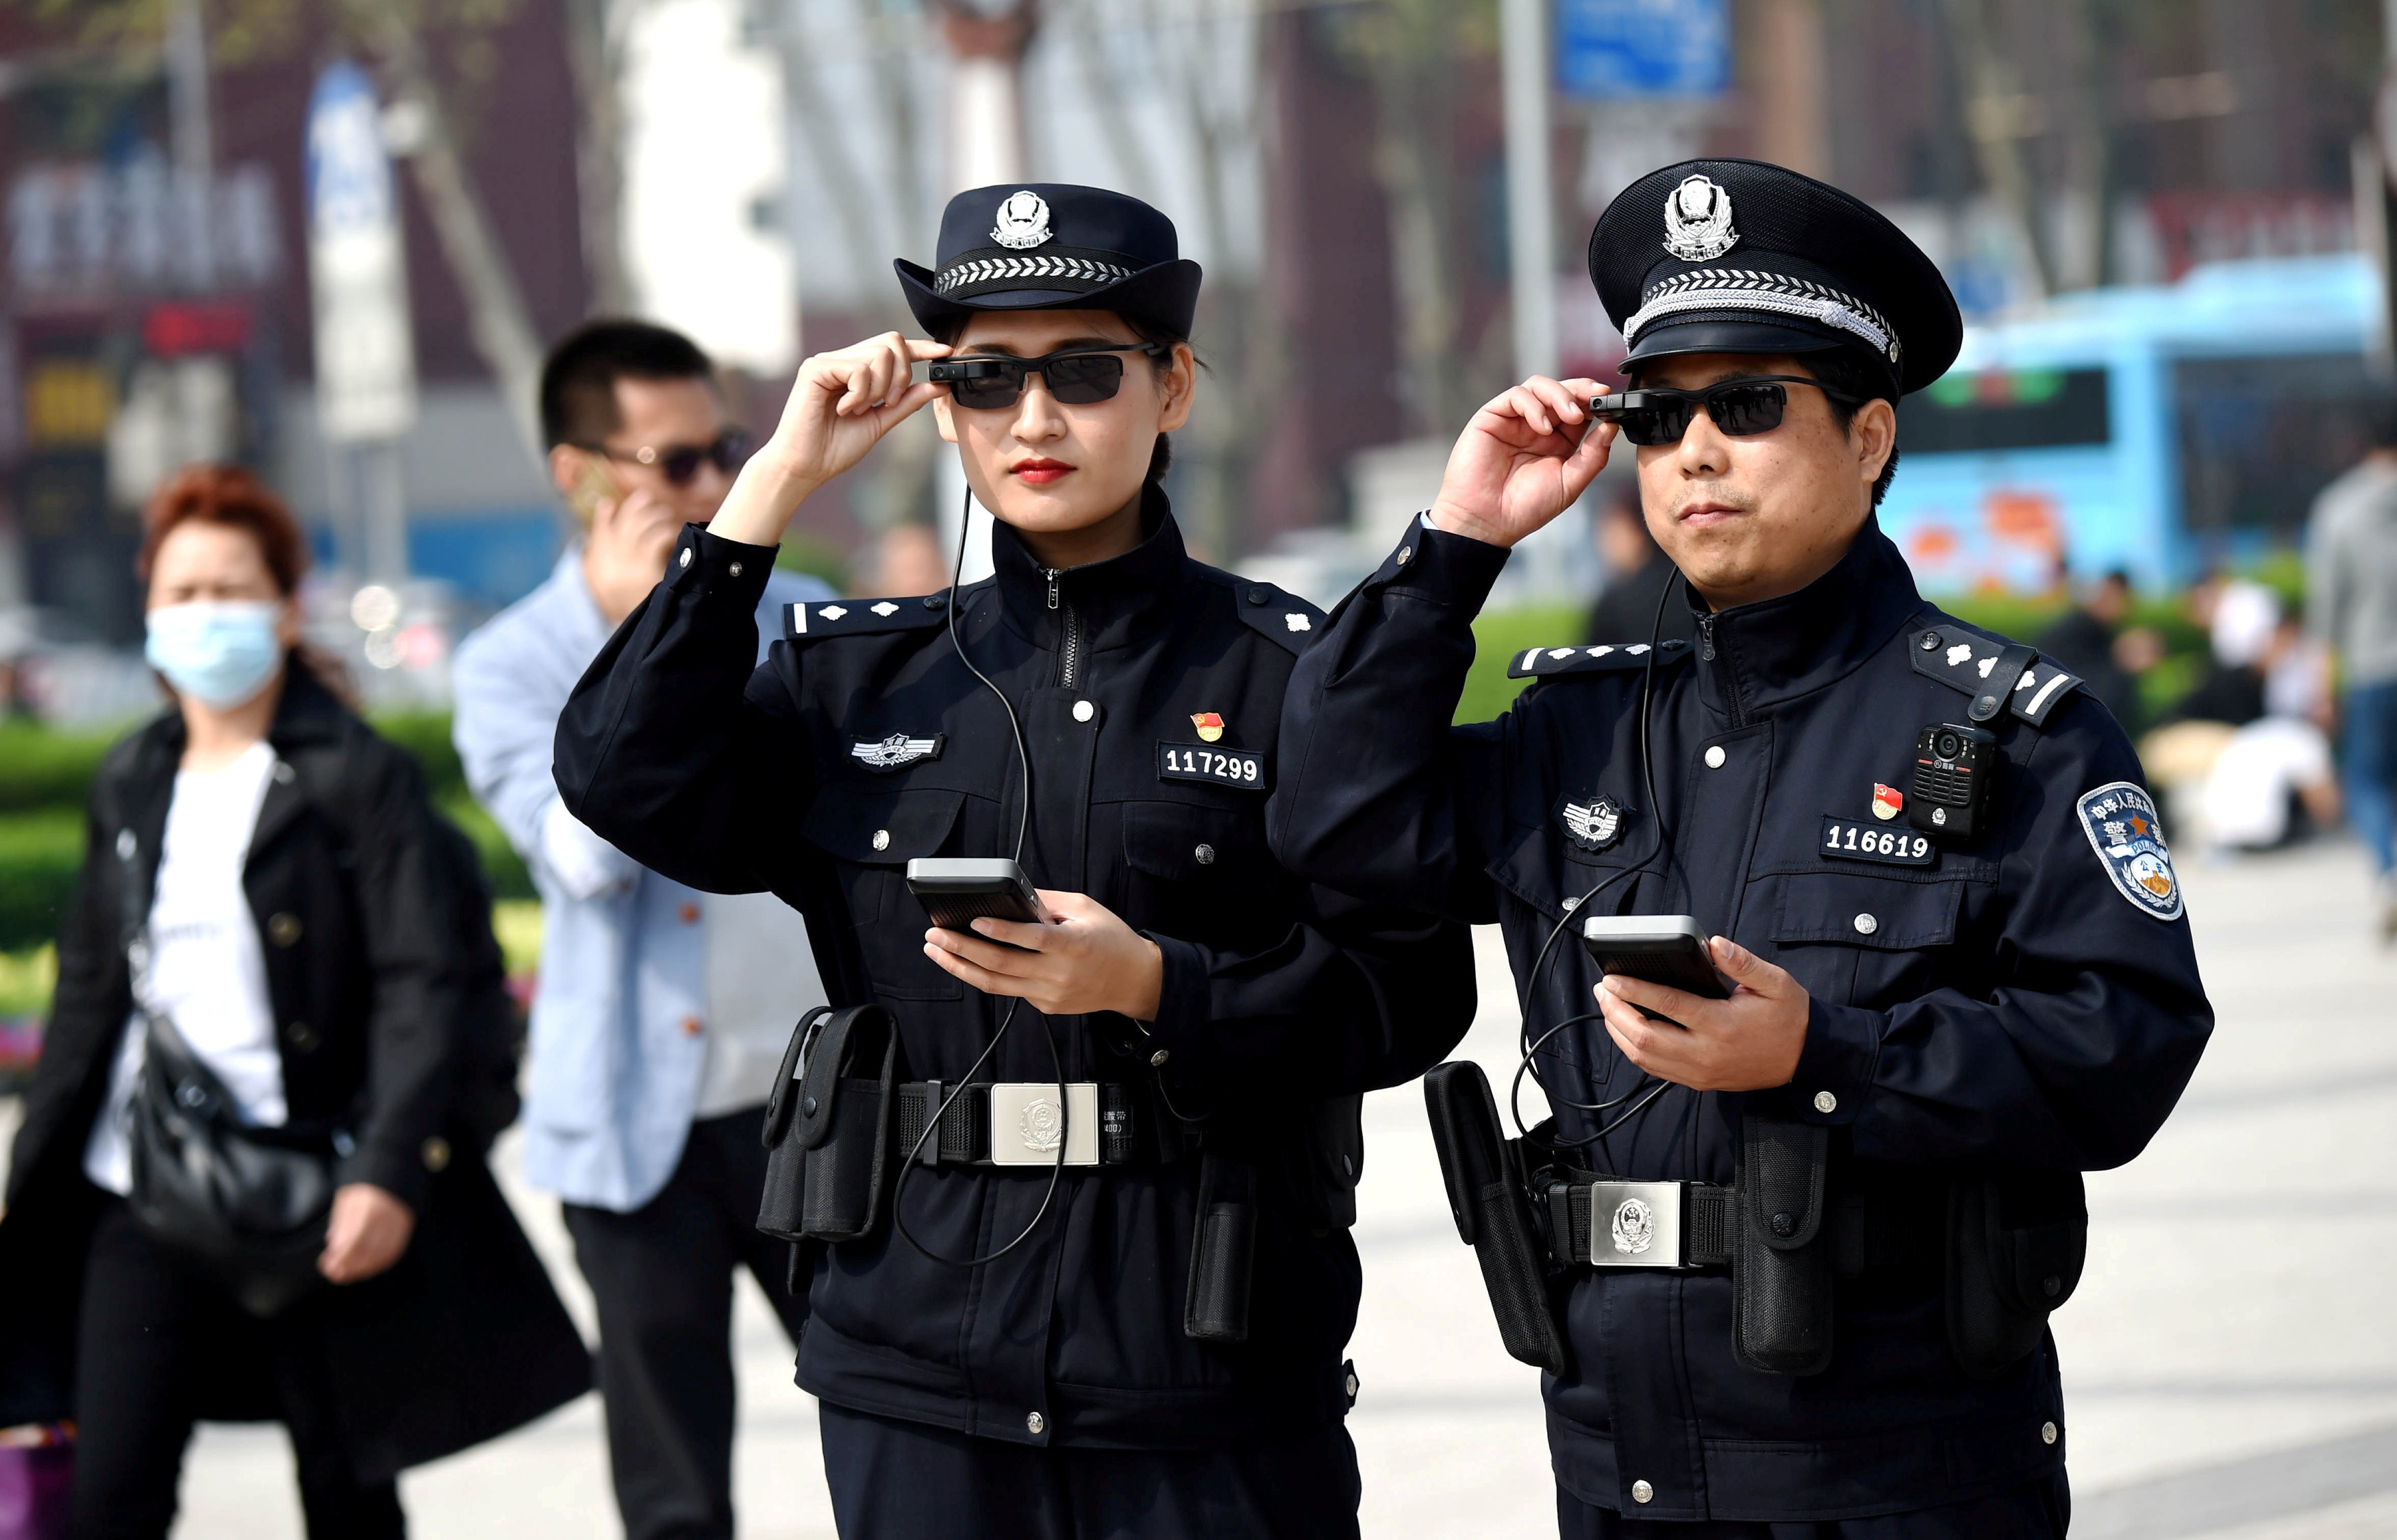 Police officers display their artificial intelligence-powered smart glasses in Luoyang, a city in central China’s Henan province, on April 3, 2018. Photo: Reuters